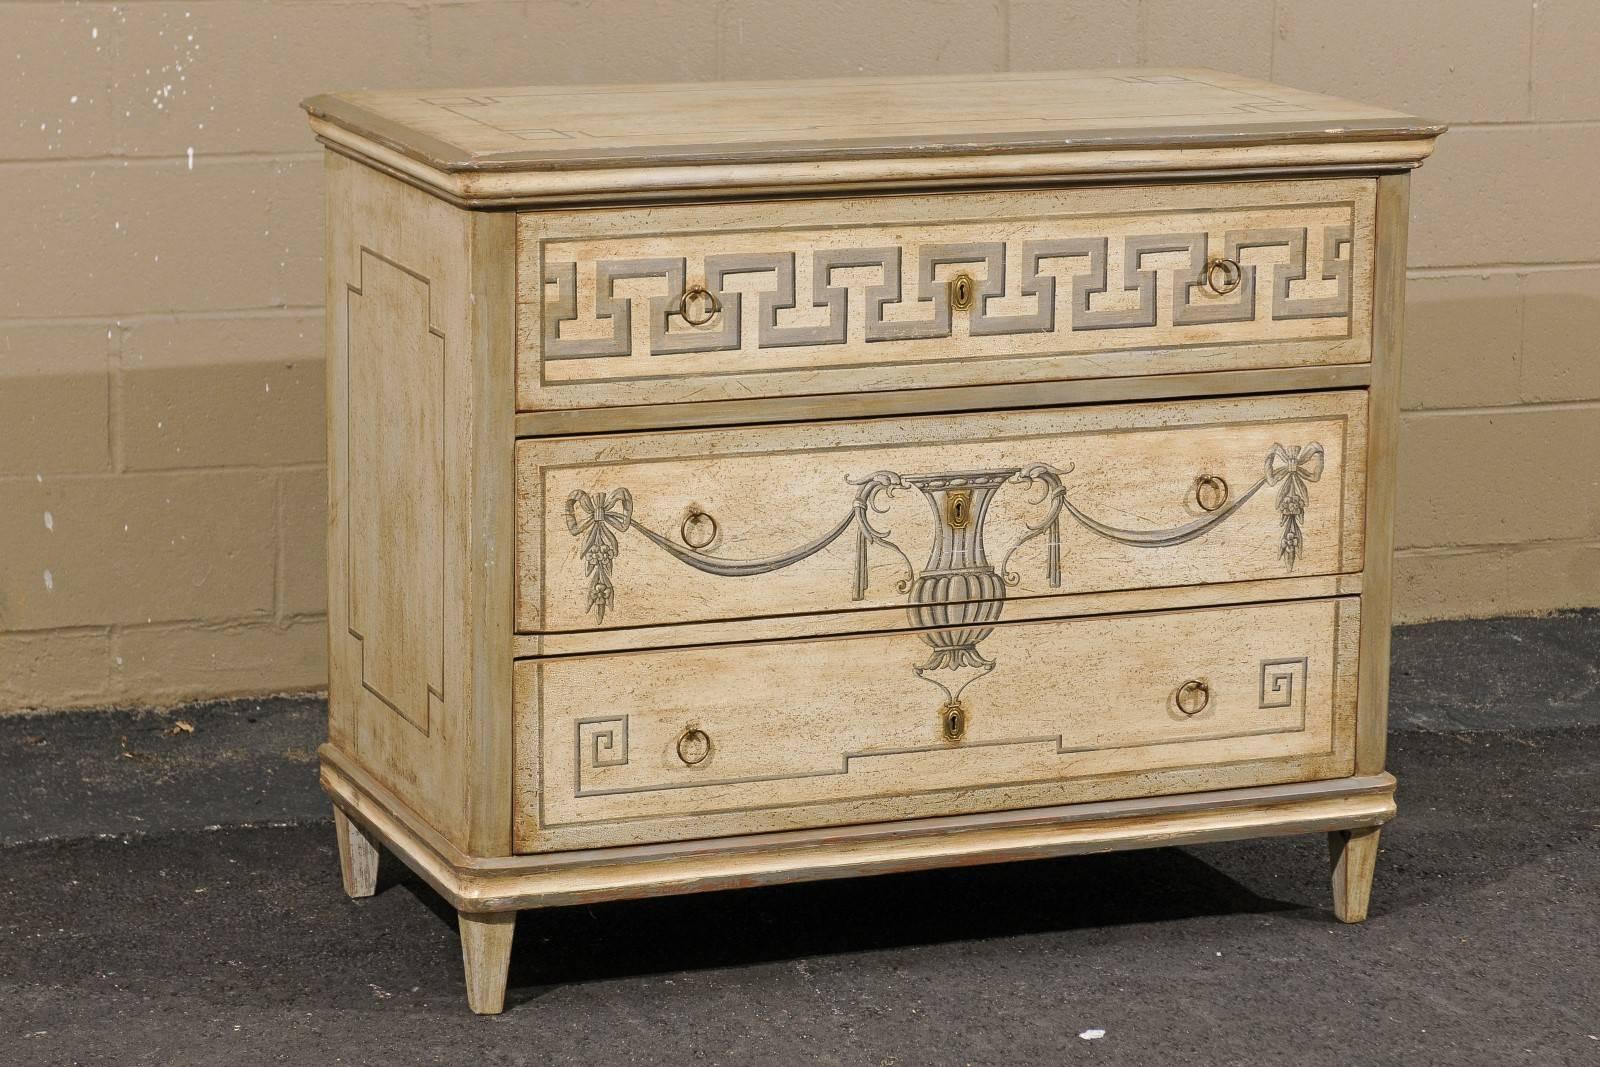 German, Mid-19th Century Neoclassical Style Painted Wood Commode with Greek Key 1